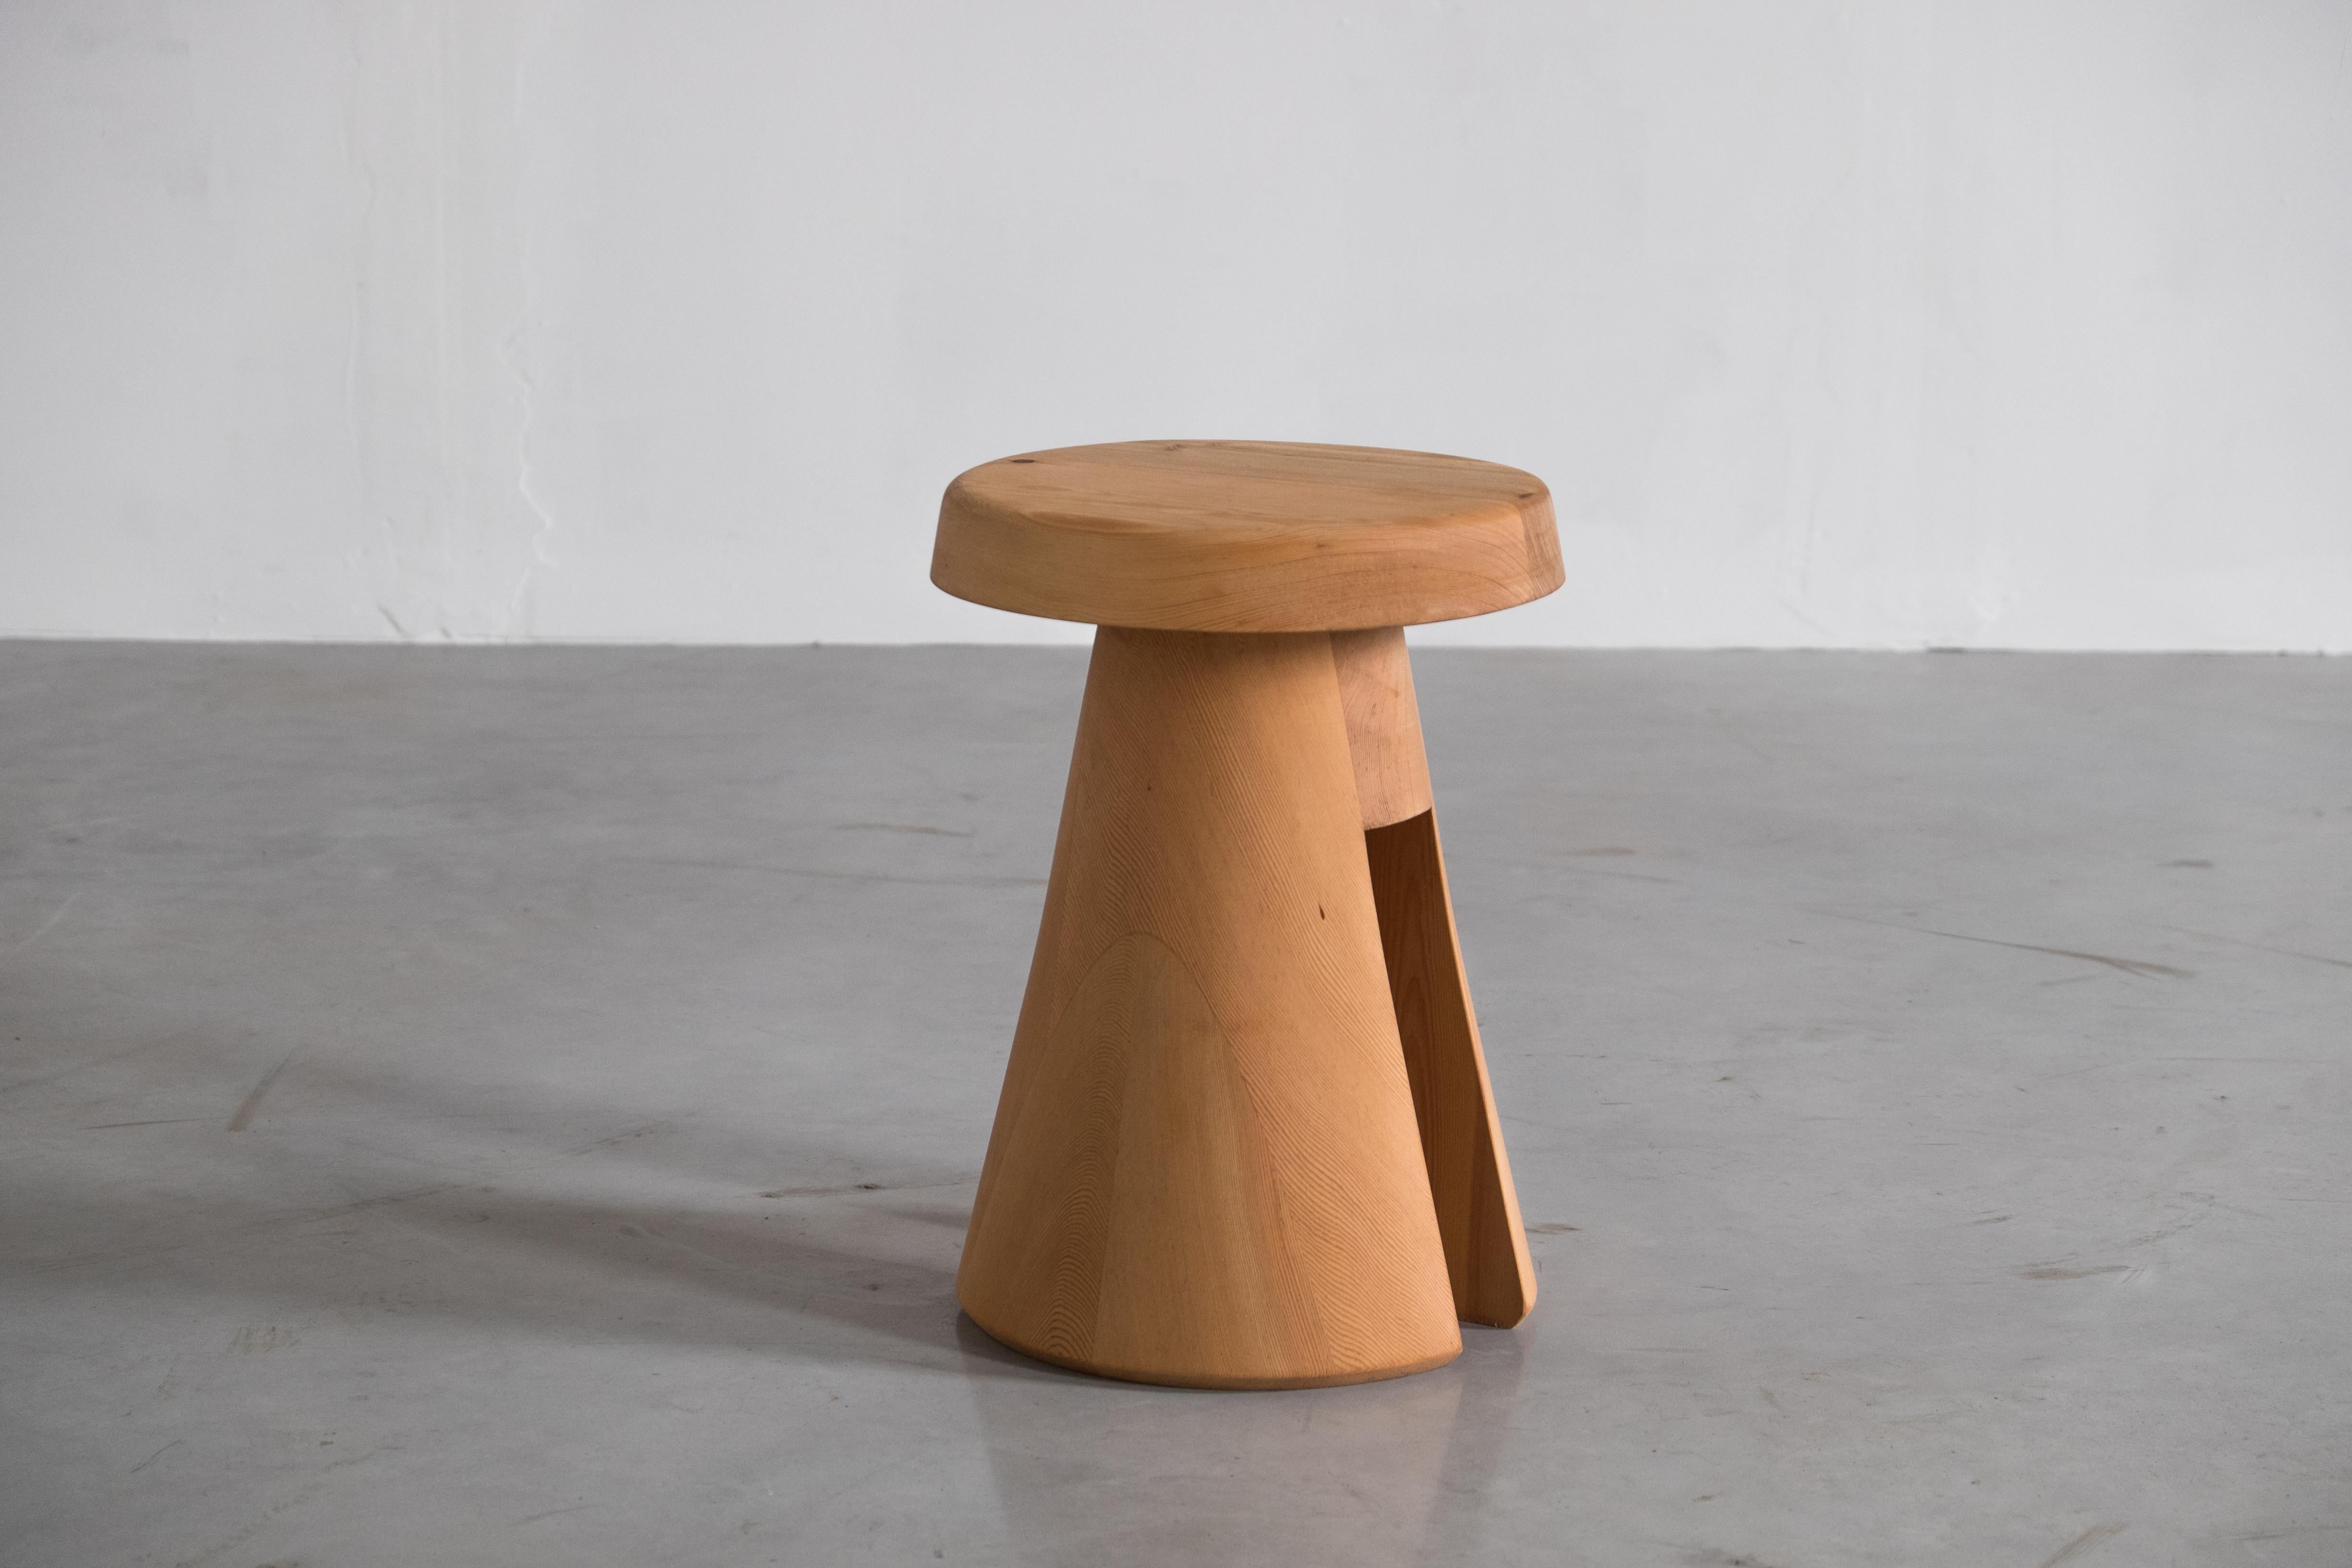 Data stool in solid oregon by Atelier Thomas Serruys
Dimensions: H 44 x D 32cm 
Materials: A hand-turned stool in solid oregon. 

A hand-turned stool in solid oregon. Trapezoid shaped base with rectangular void, topped by a soft edged circular